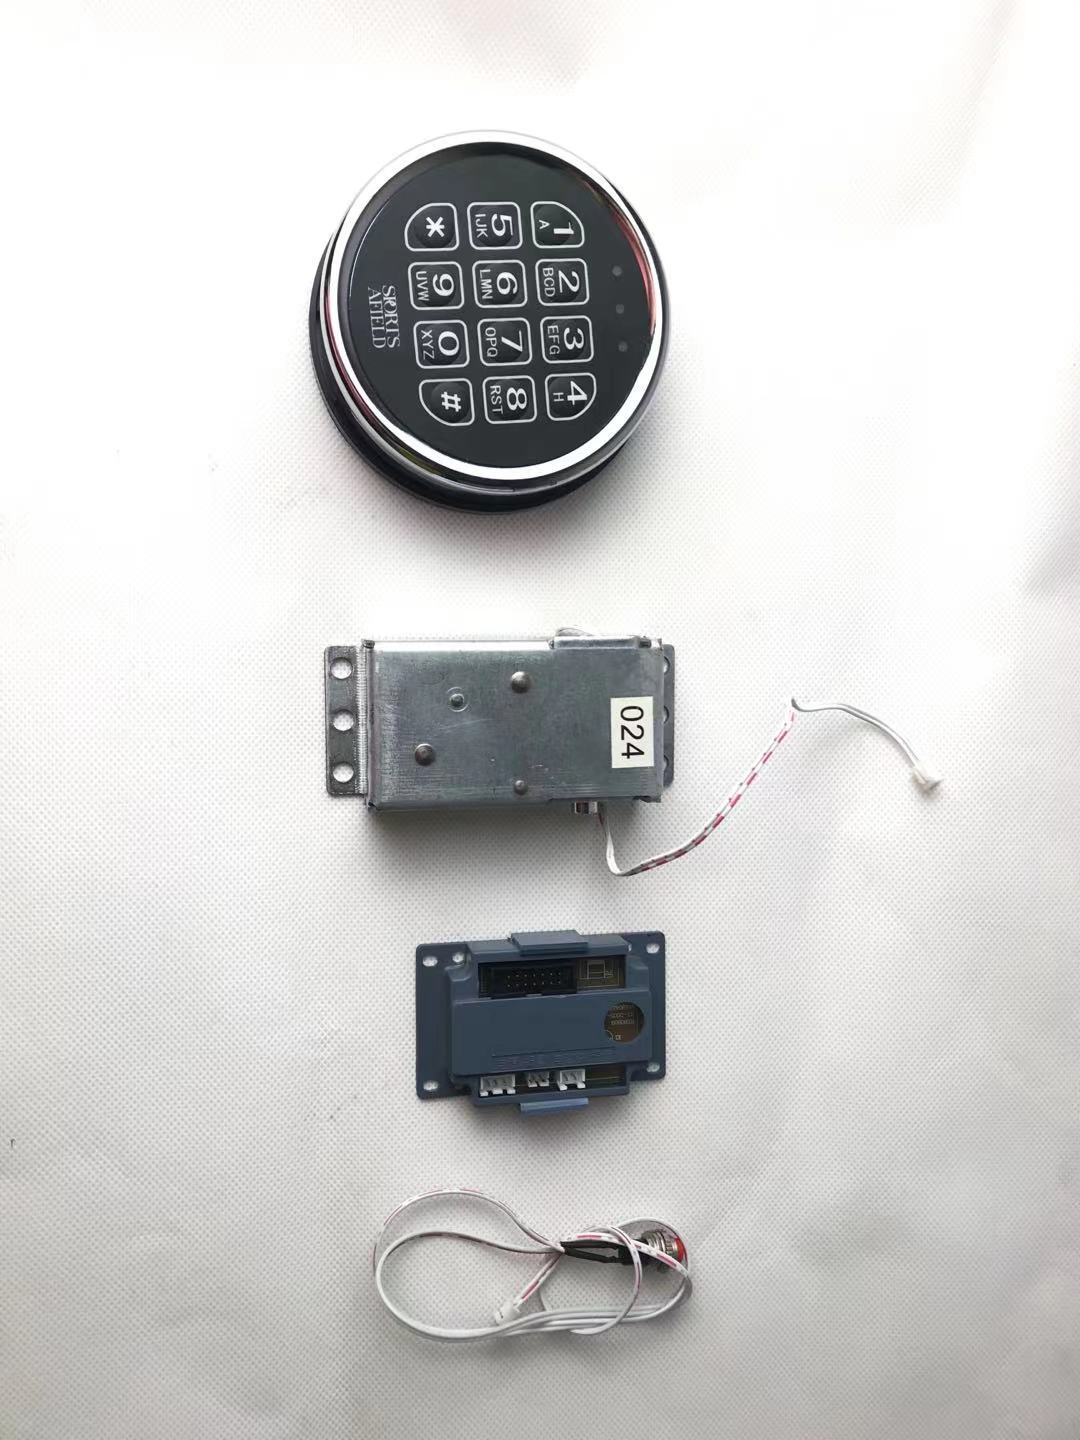 Round smart biometric digital rfid electronic safety cabinet locks for hotel and home